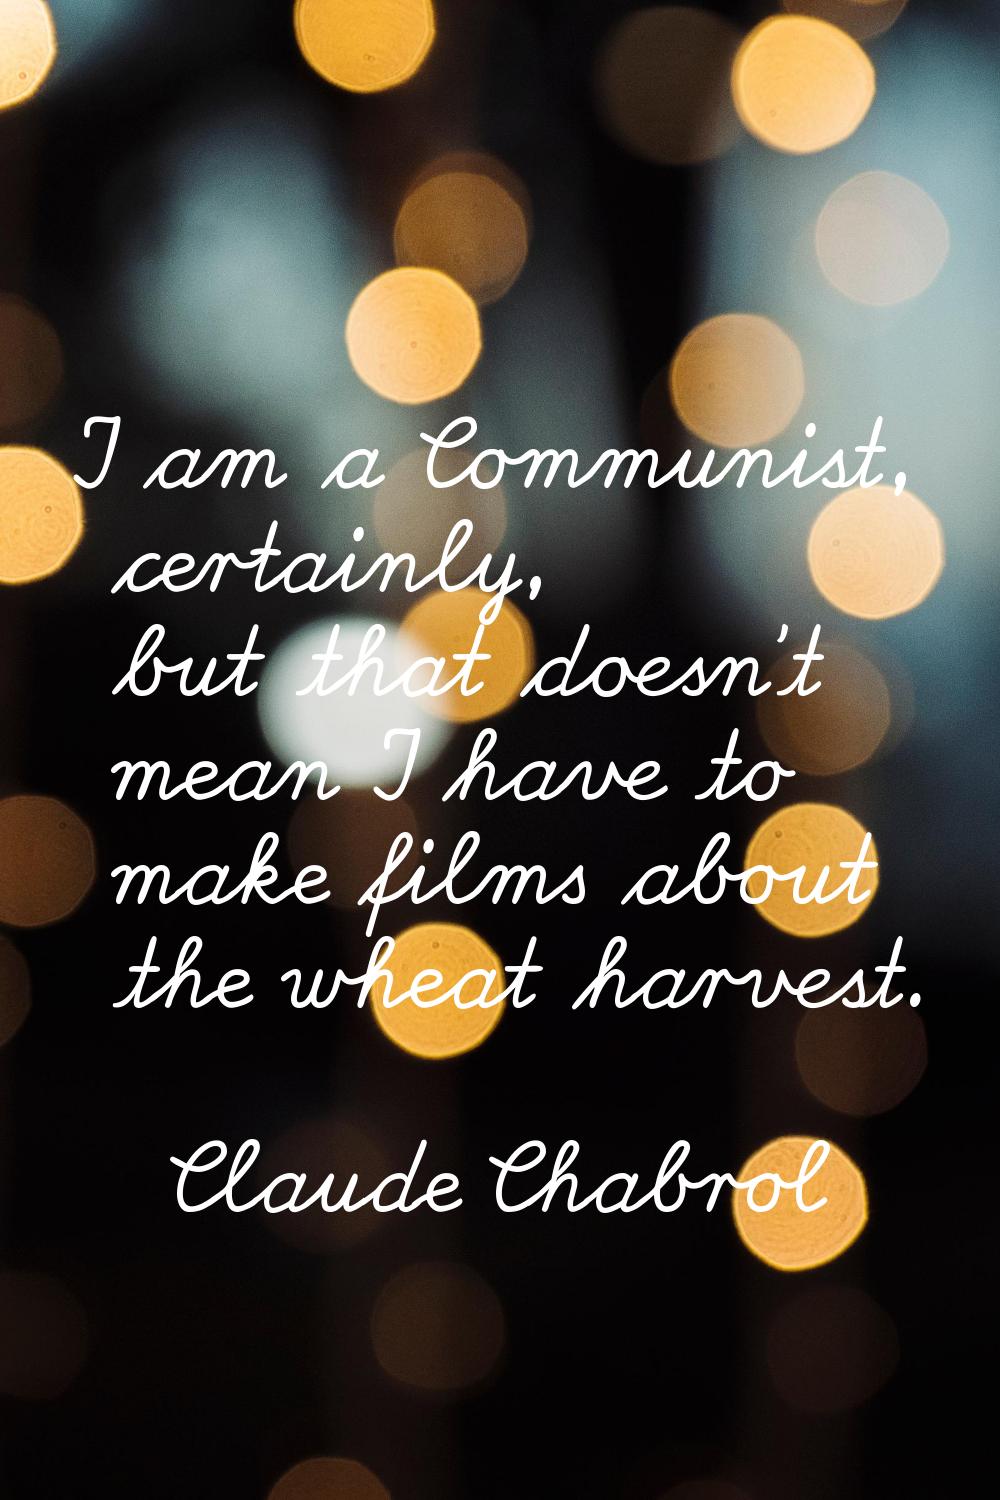 I am a Communist, certainly, but that doesn't mean I have to make films about the wheat harvest.